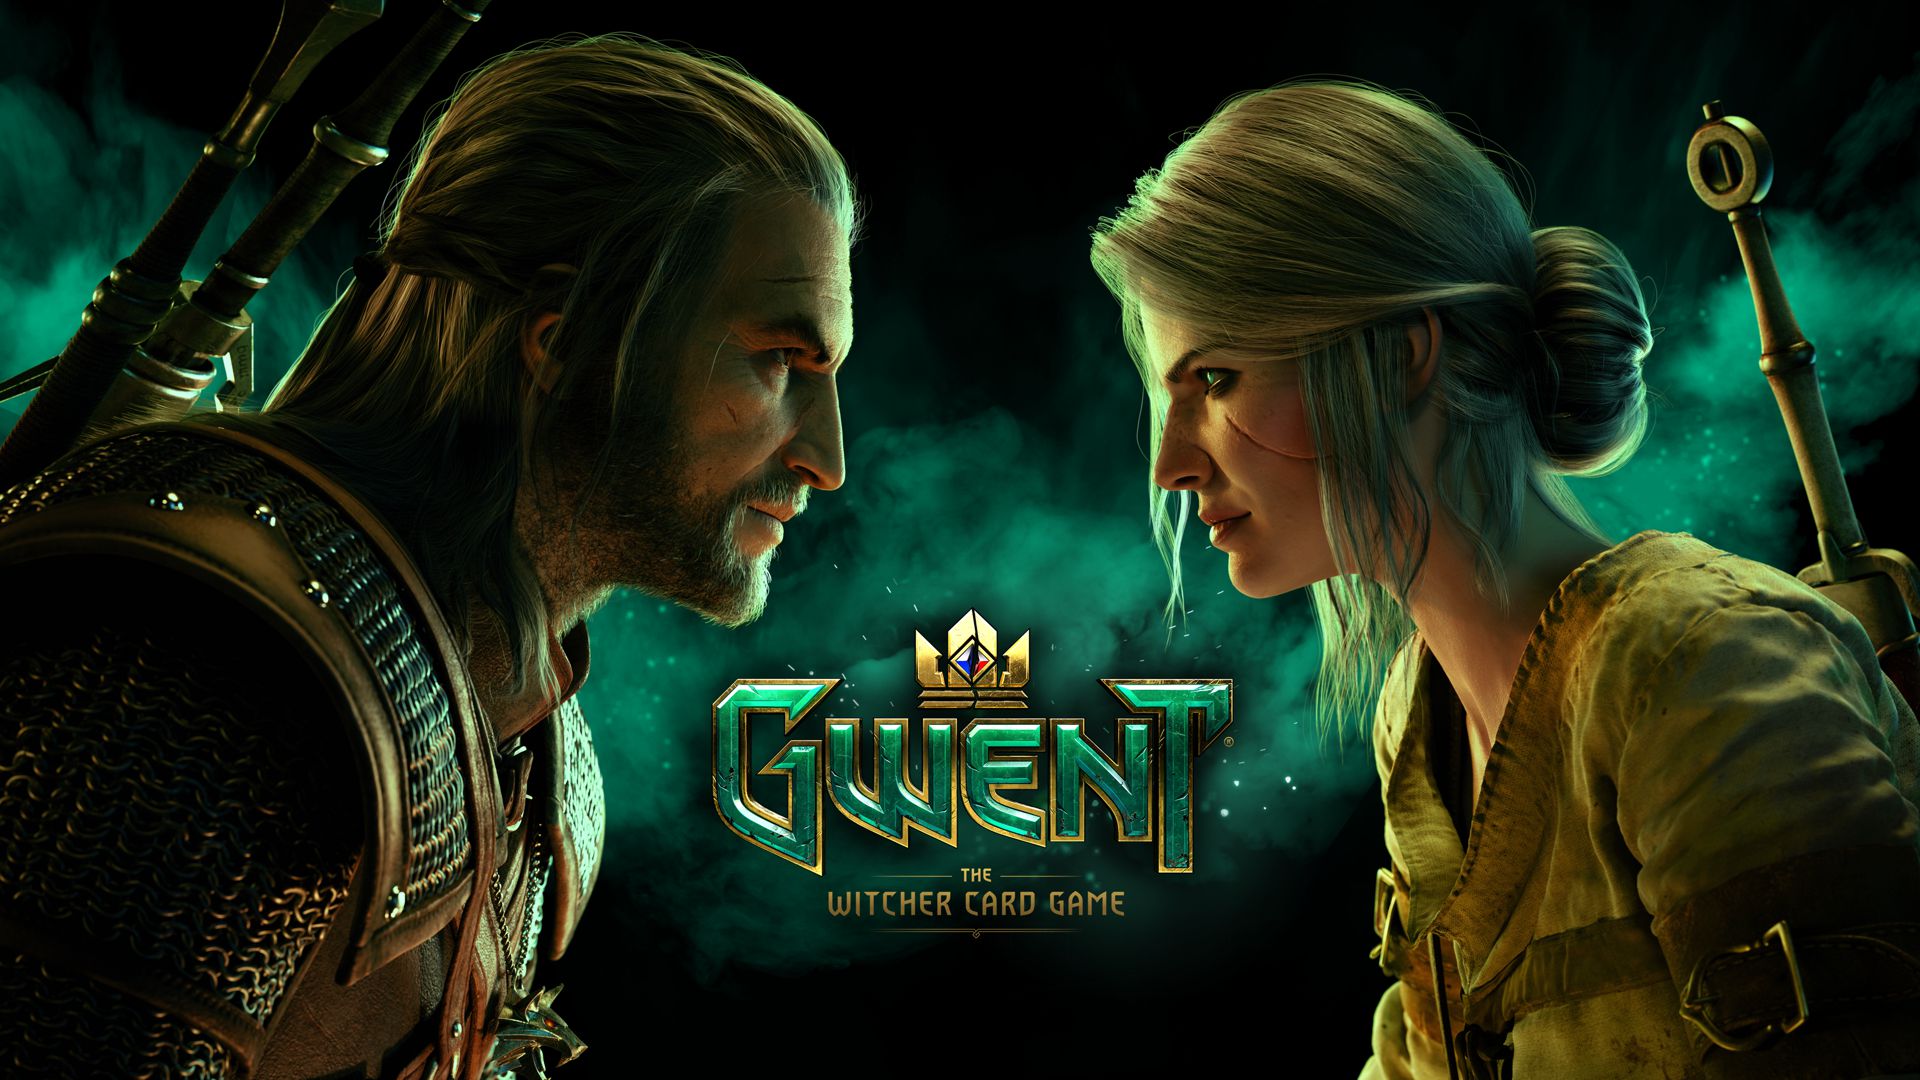 Gwent - The Witcher Card Game Principal